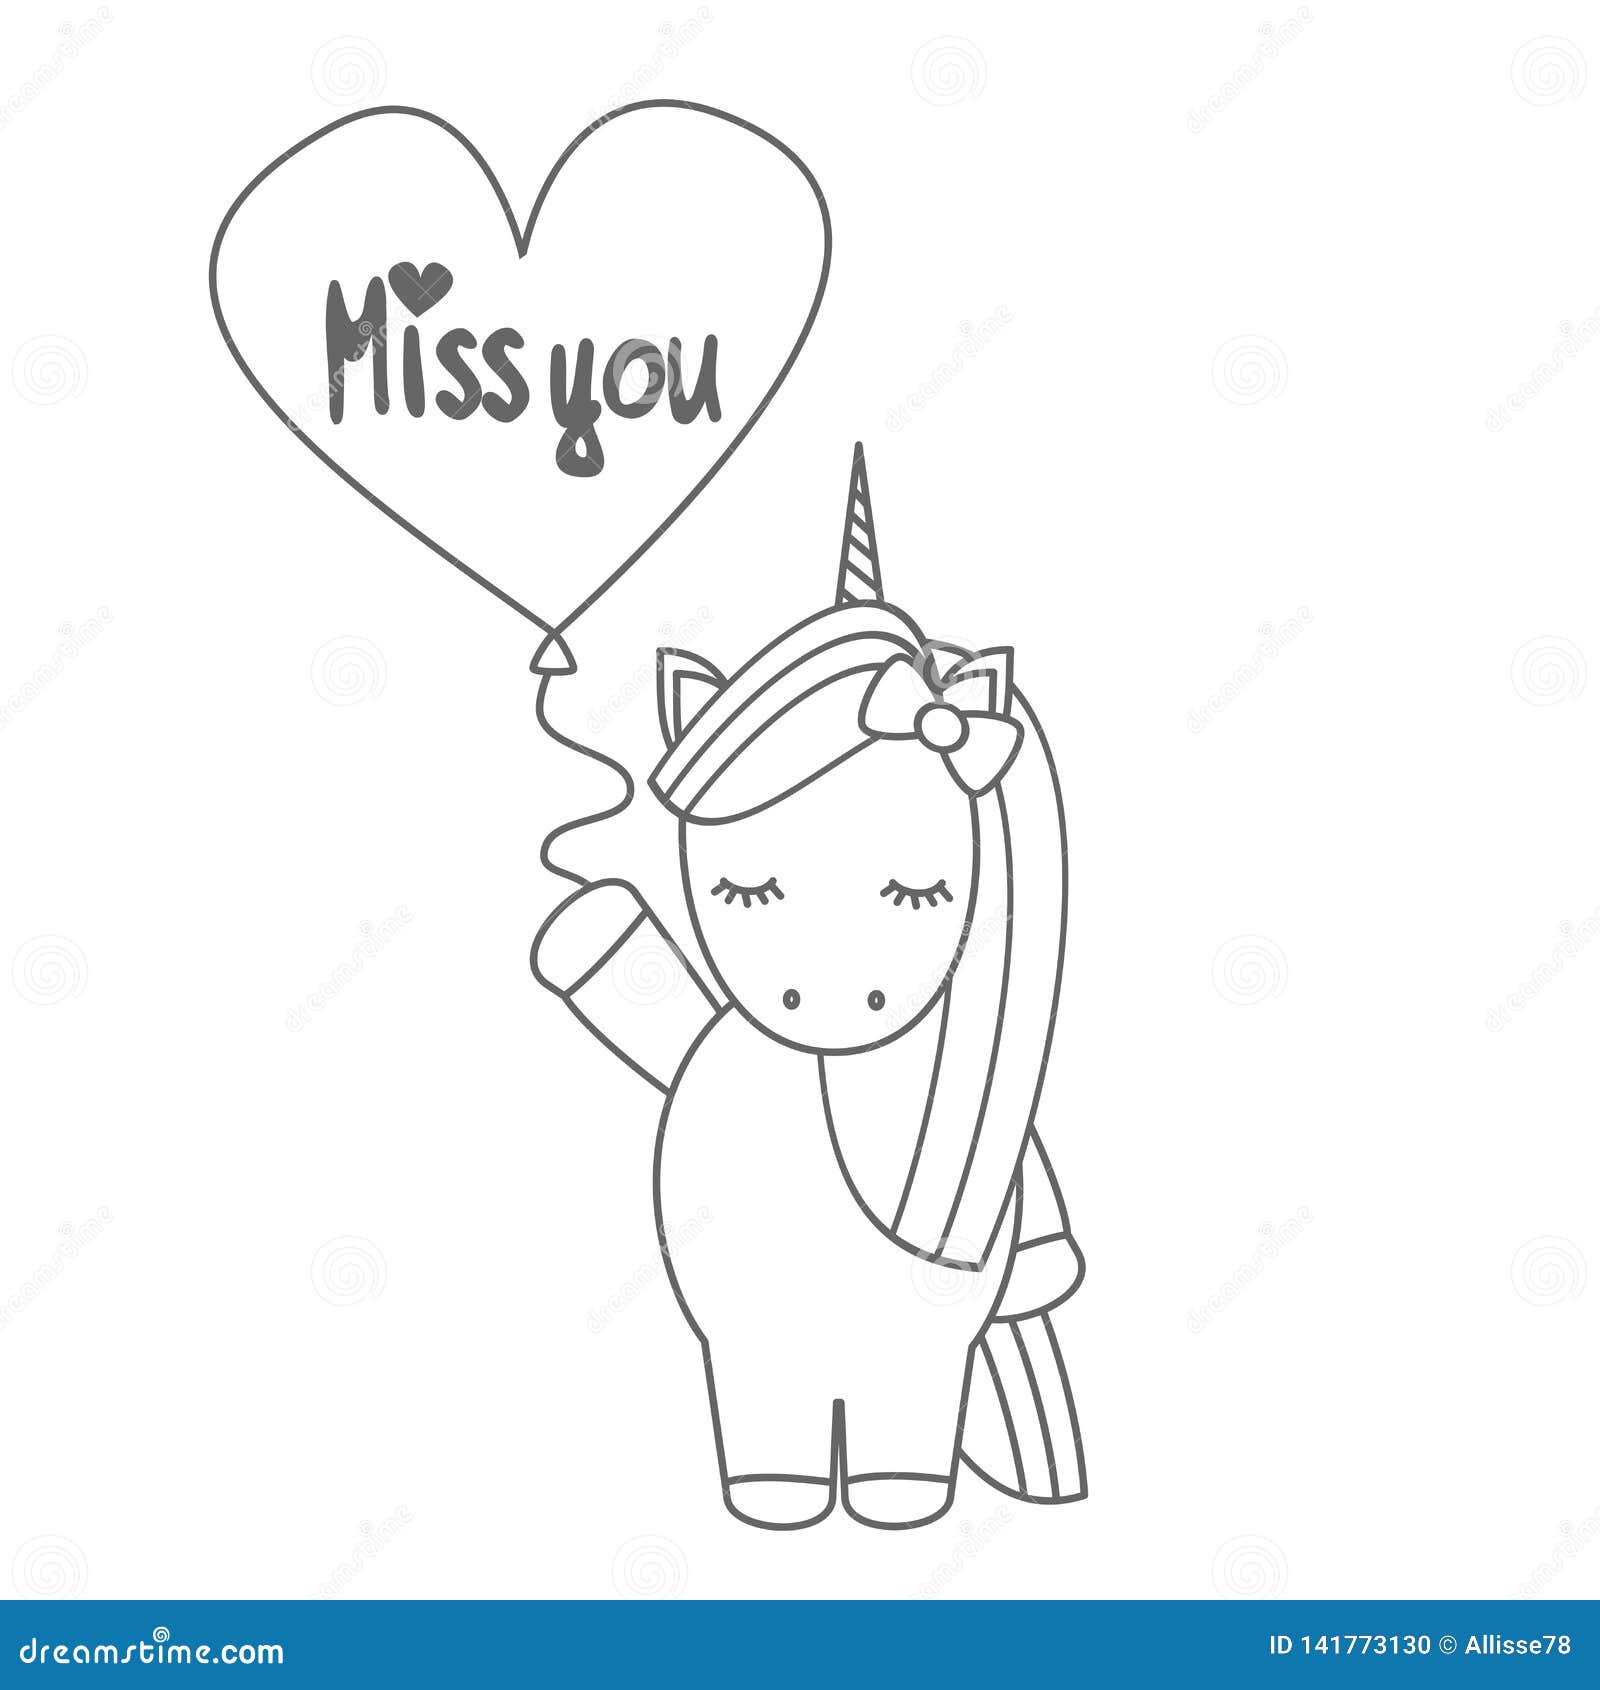 Cute cartoon black and white vector unicorn with balloon with hand drawn lettering miss you text illustration for coloring art stock vector